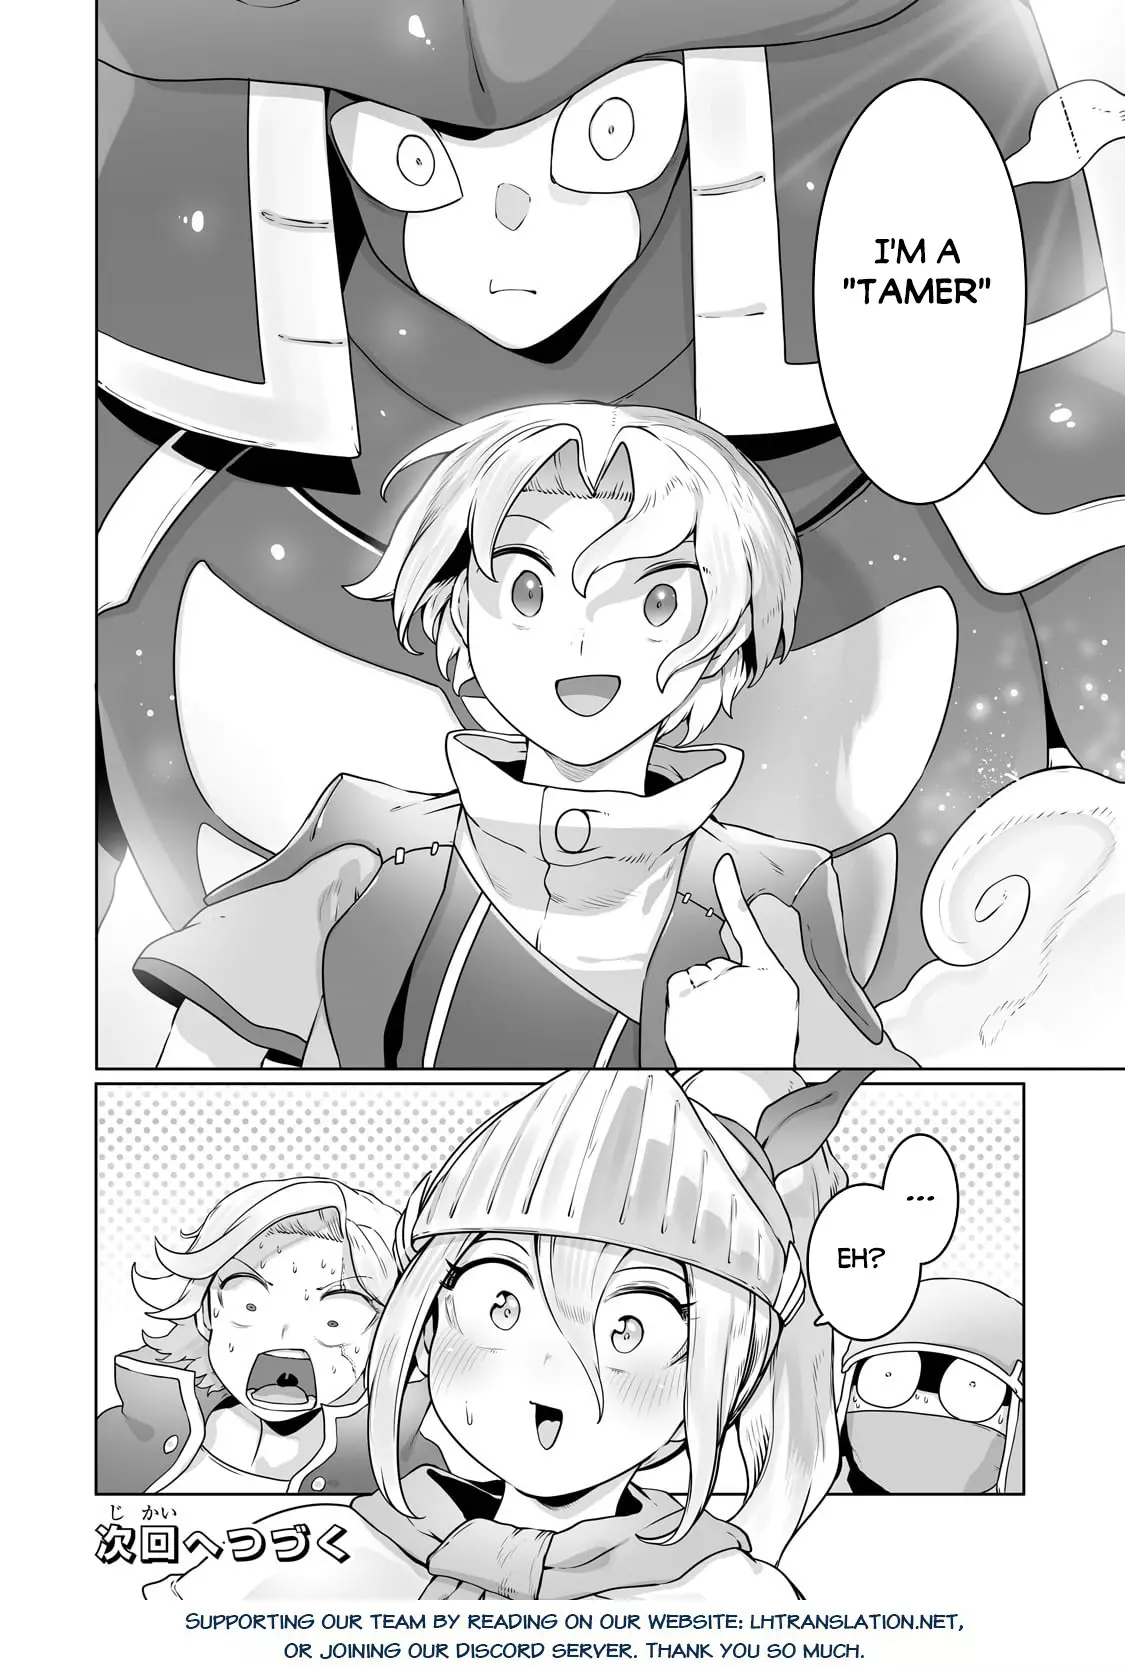 The Useless Tamer Will Turn Into The Top Unconsciously By My Previous Life Knowledge - 27 page 24-4207846f